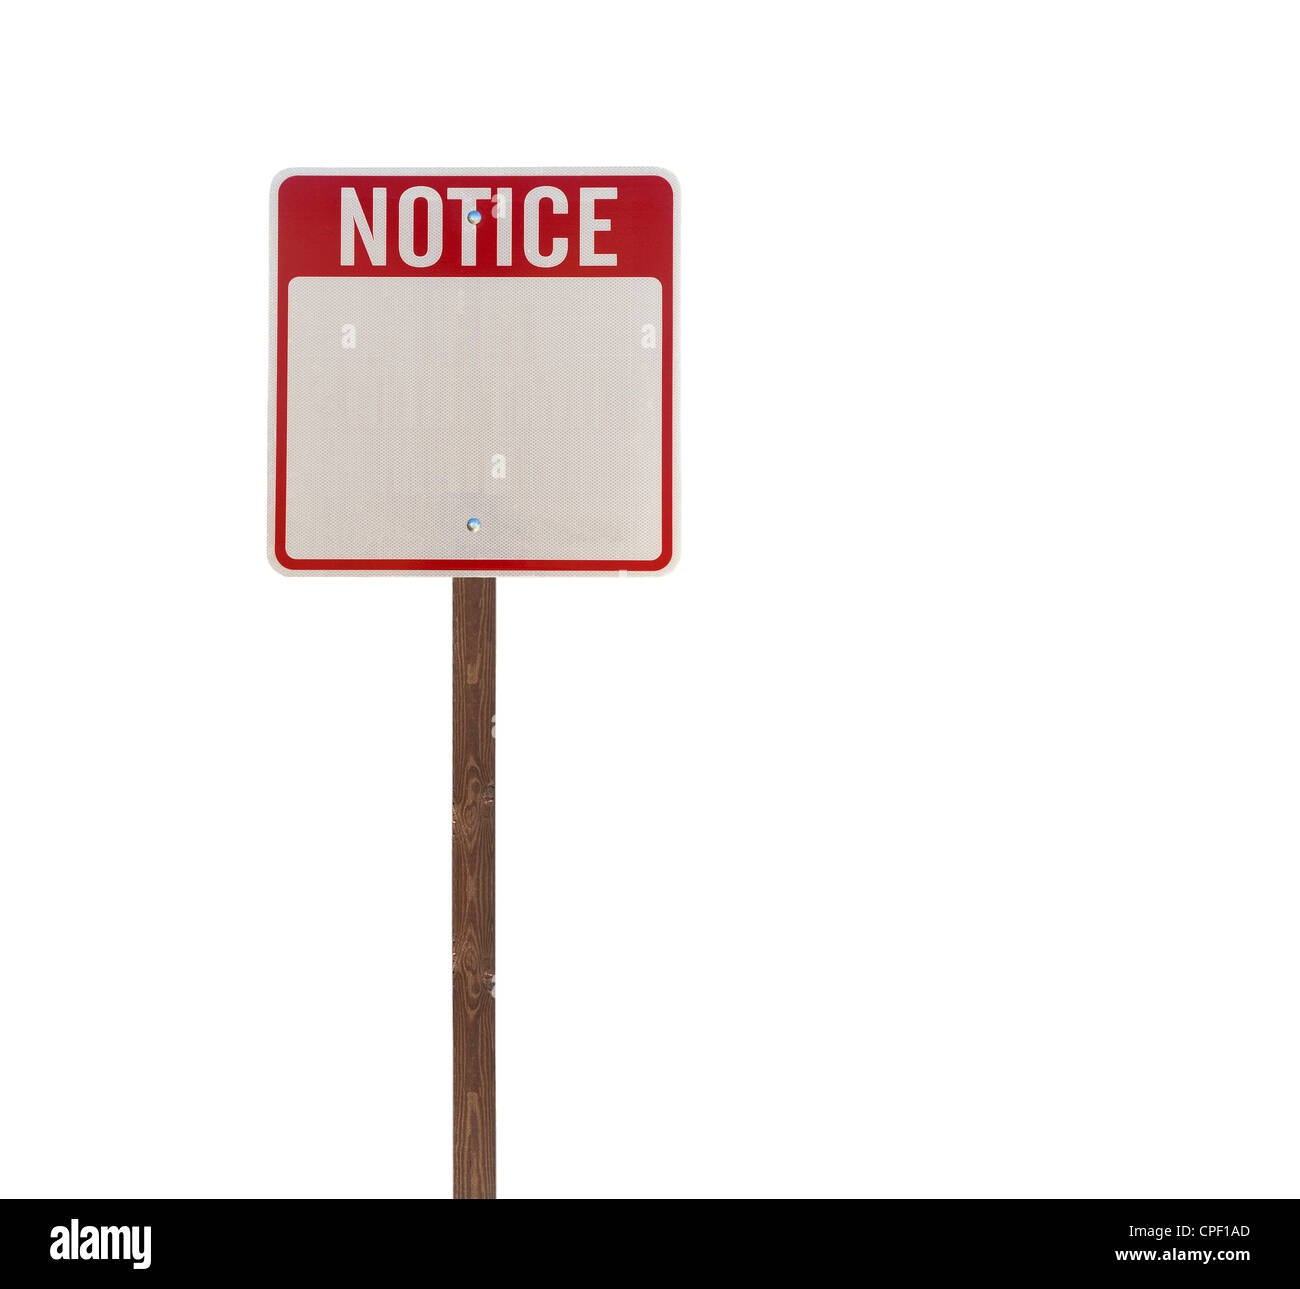 Tall isolated notice road sign on a wooden post. Stock Photo